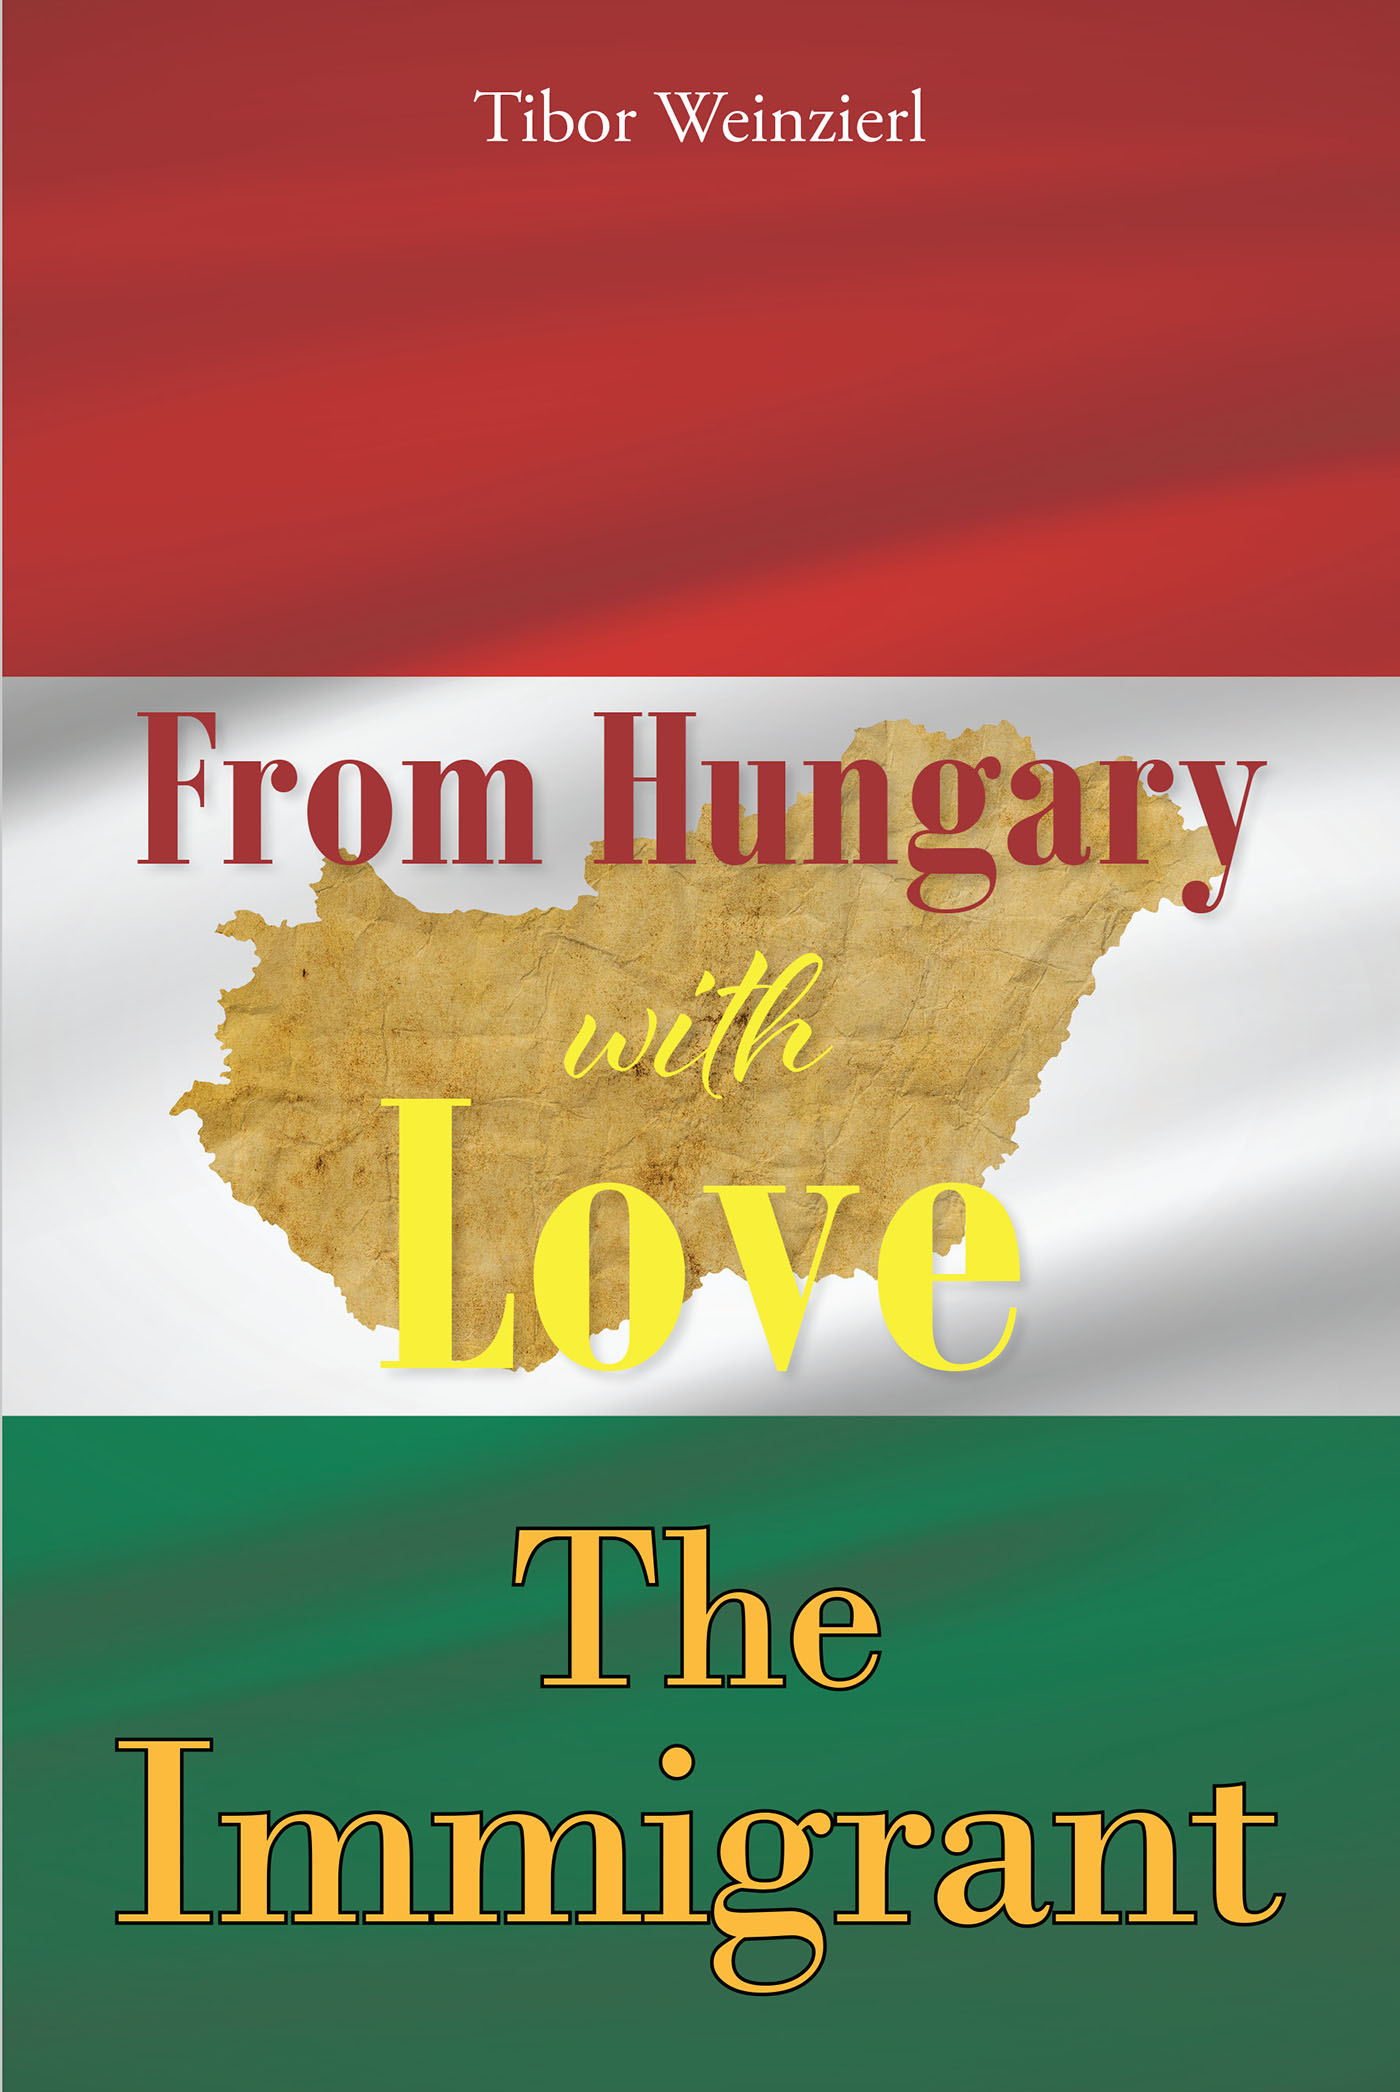 Tibor Weinzierl’s Newly Released “From Hungary with Love: The Immigrant” is a Fascinating Account of a Young Man’s Journey to Freedom